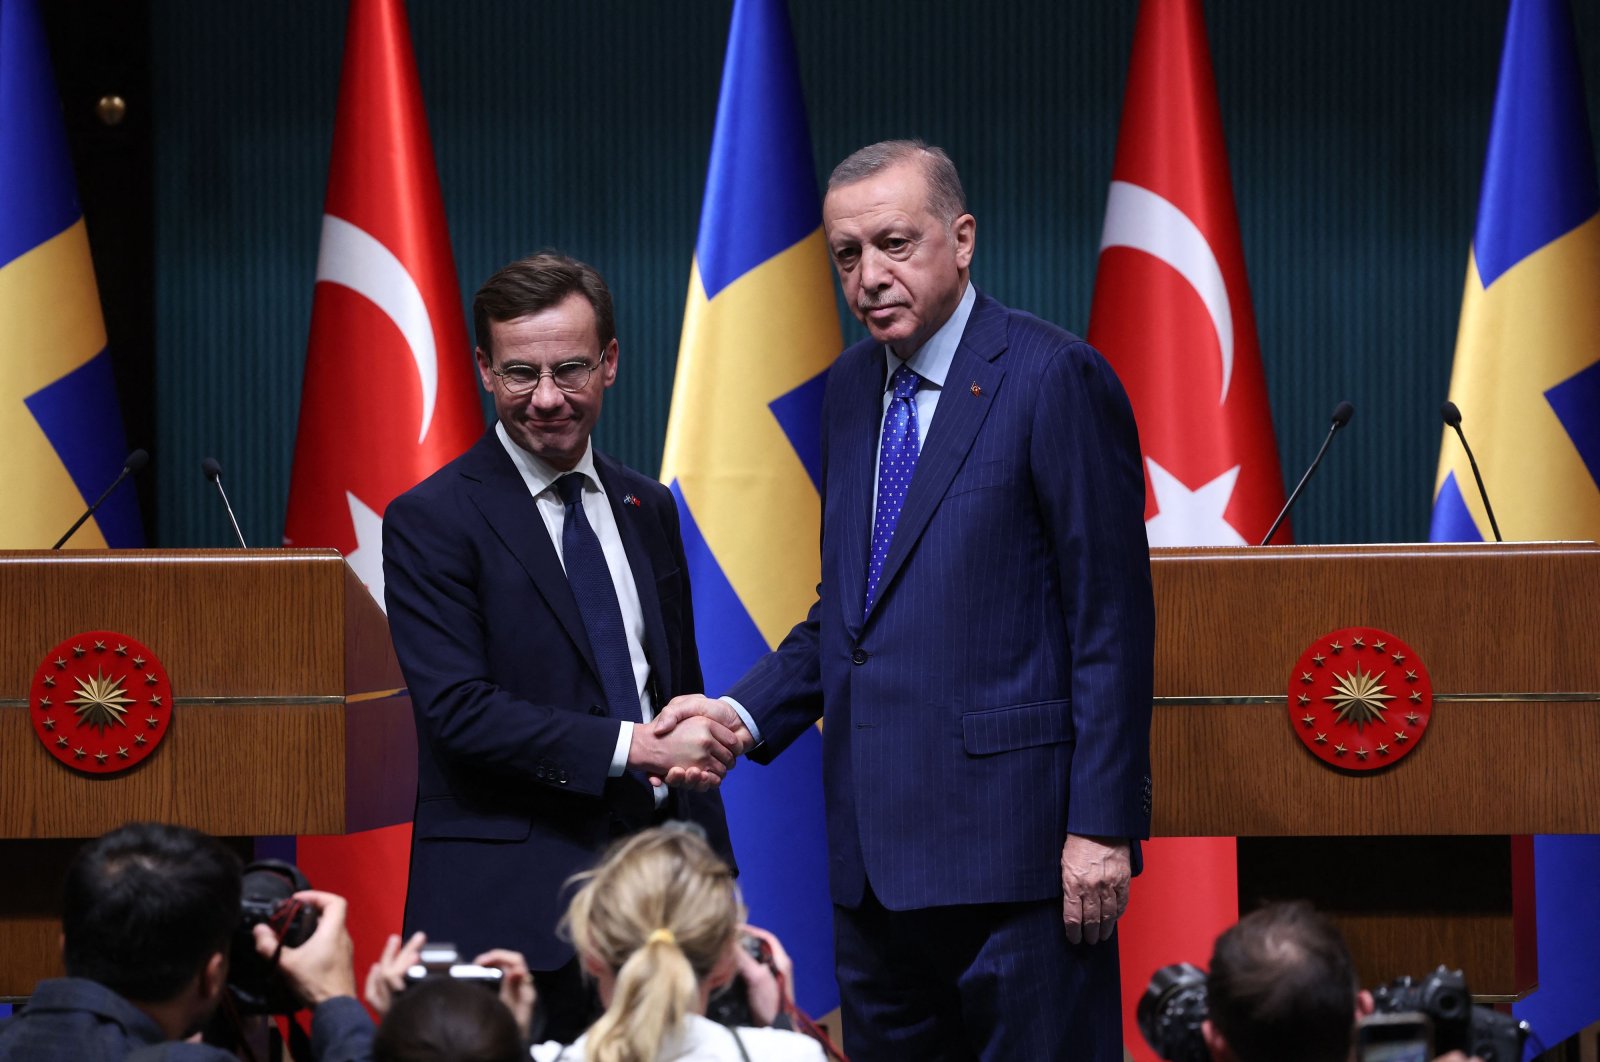 President Recep Tayyip Erdoğan shakes hand with Swedish Prime Minister Ulf Kristersson (L) during a press conference following their meeting at the Presidential Palace in the capital Ankara, Türkiye, Nov. 8, 2022. (AFP Photo)